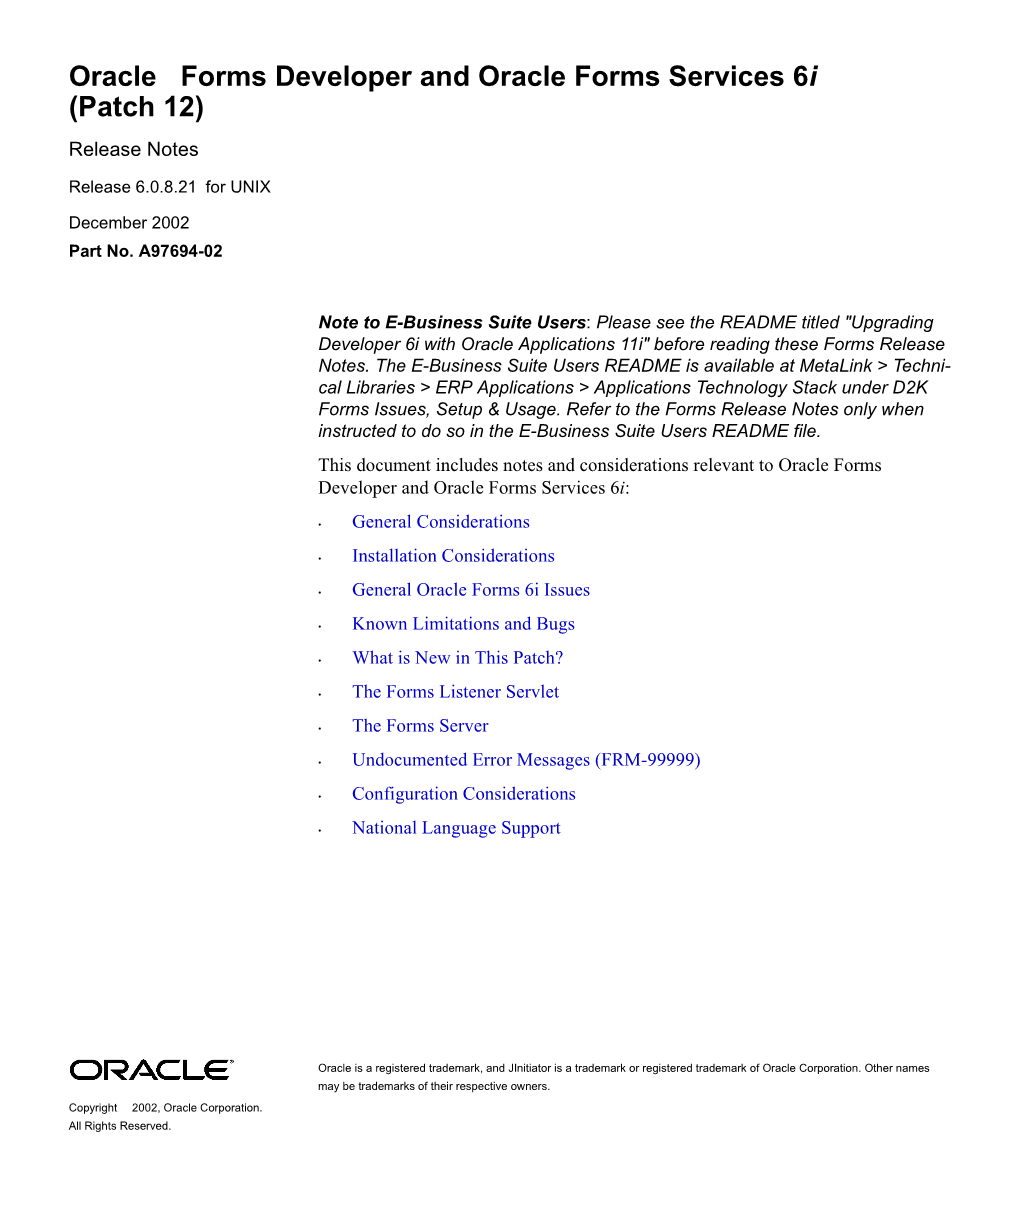 Forms Developer and Oracle Forms Services 6I (Patch 12) Release Notes